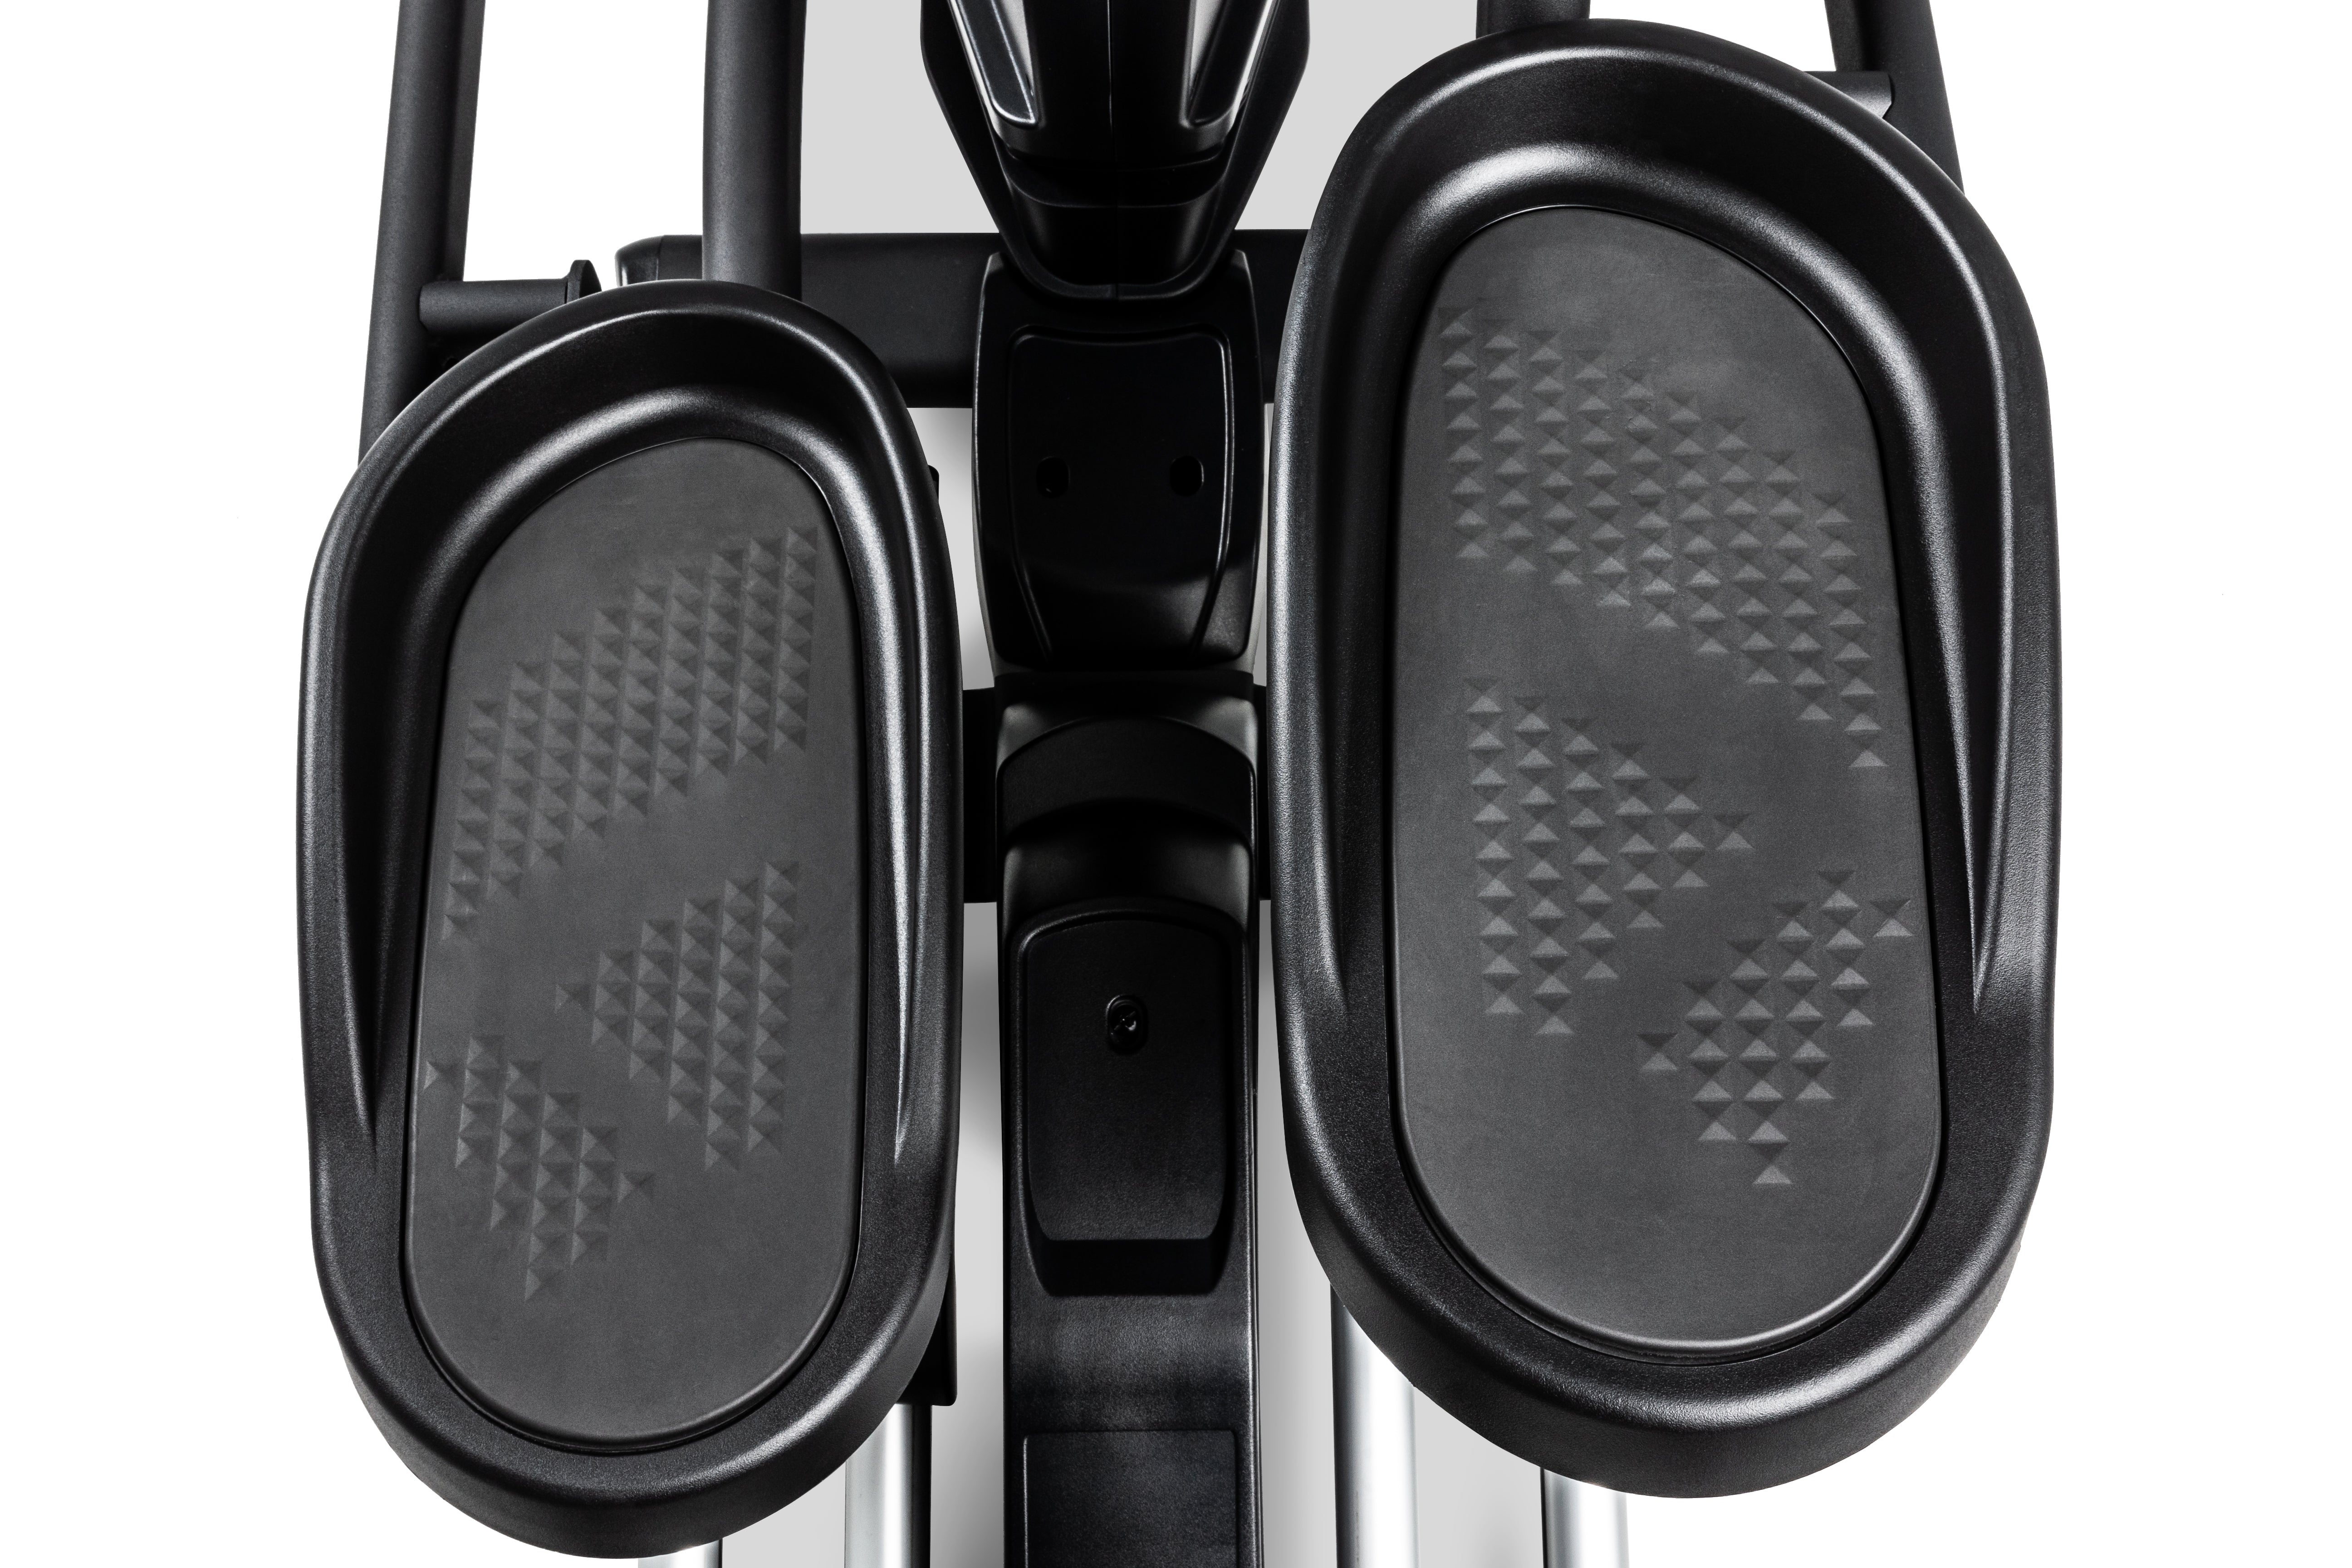 Top-down view of the Sole E35 elliptical trainer's textured foot pedals, central column, and handle attachments.